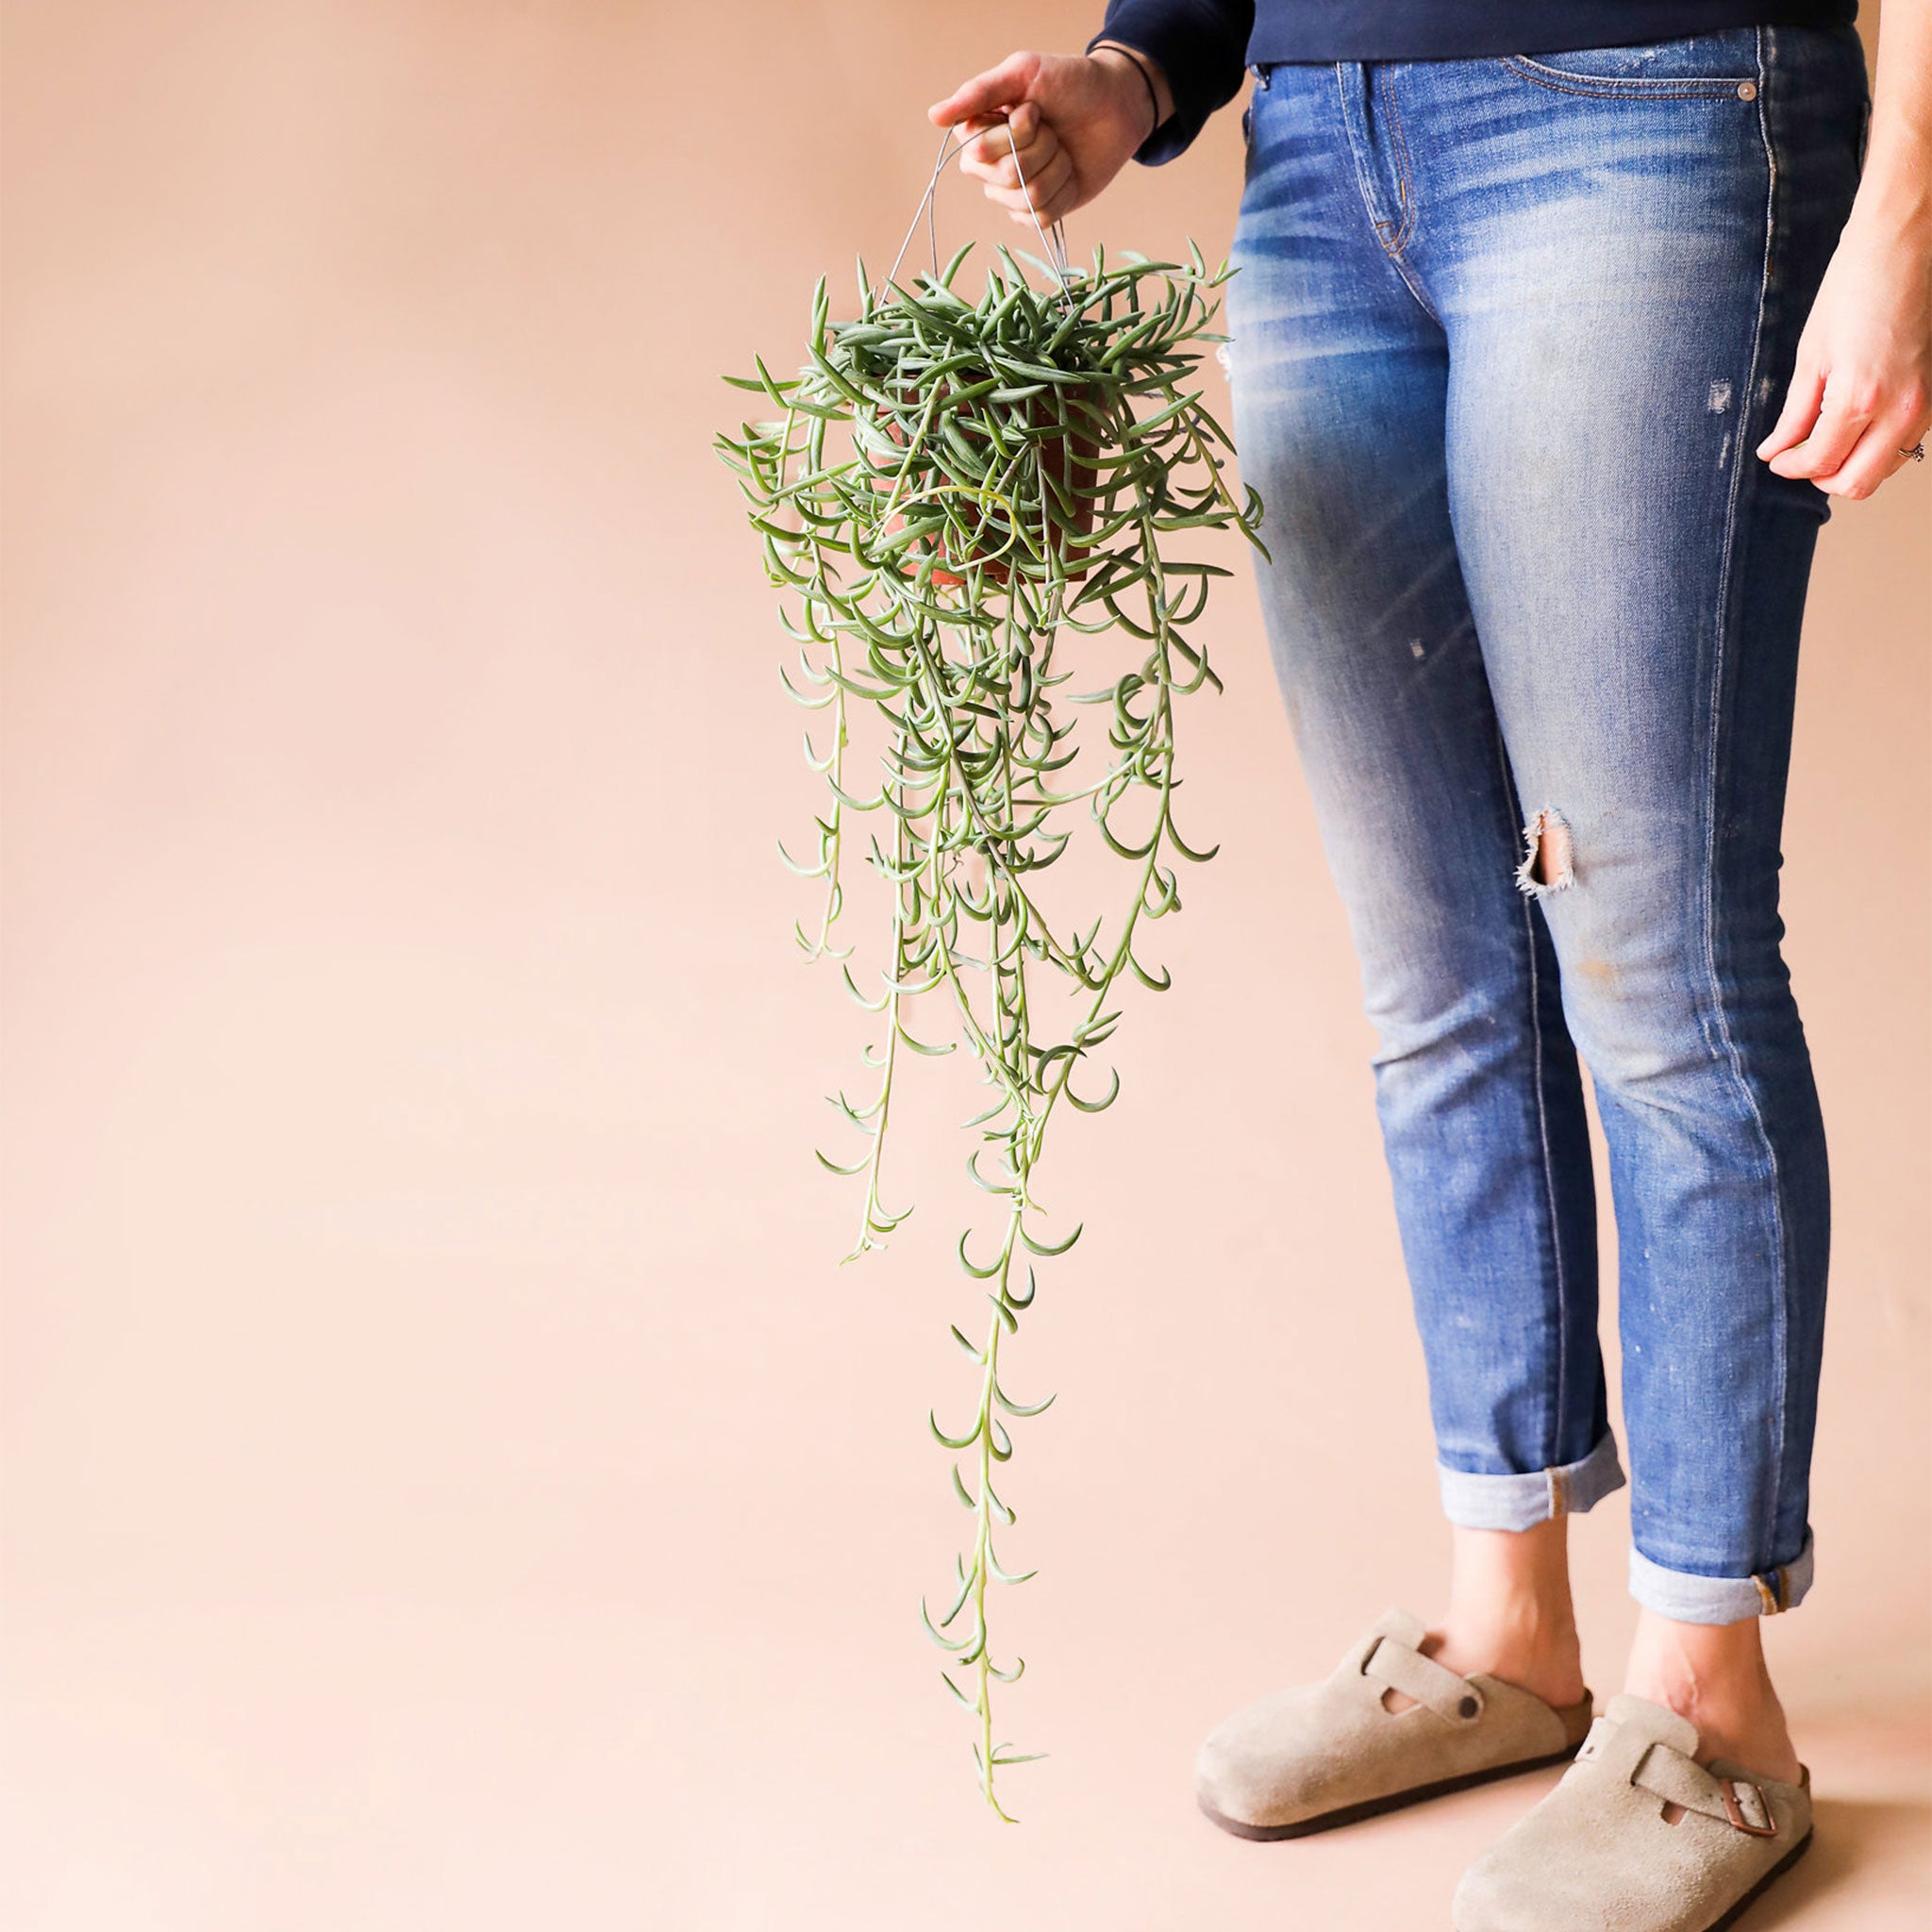 the bottom half of a person standing while holding a wire that is attached to a small pot. Inside the pot is a long, trailing light green plant. On the stems are little hook shaped succulents.